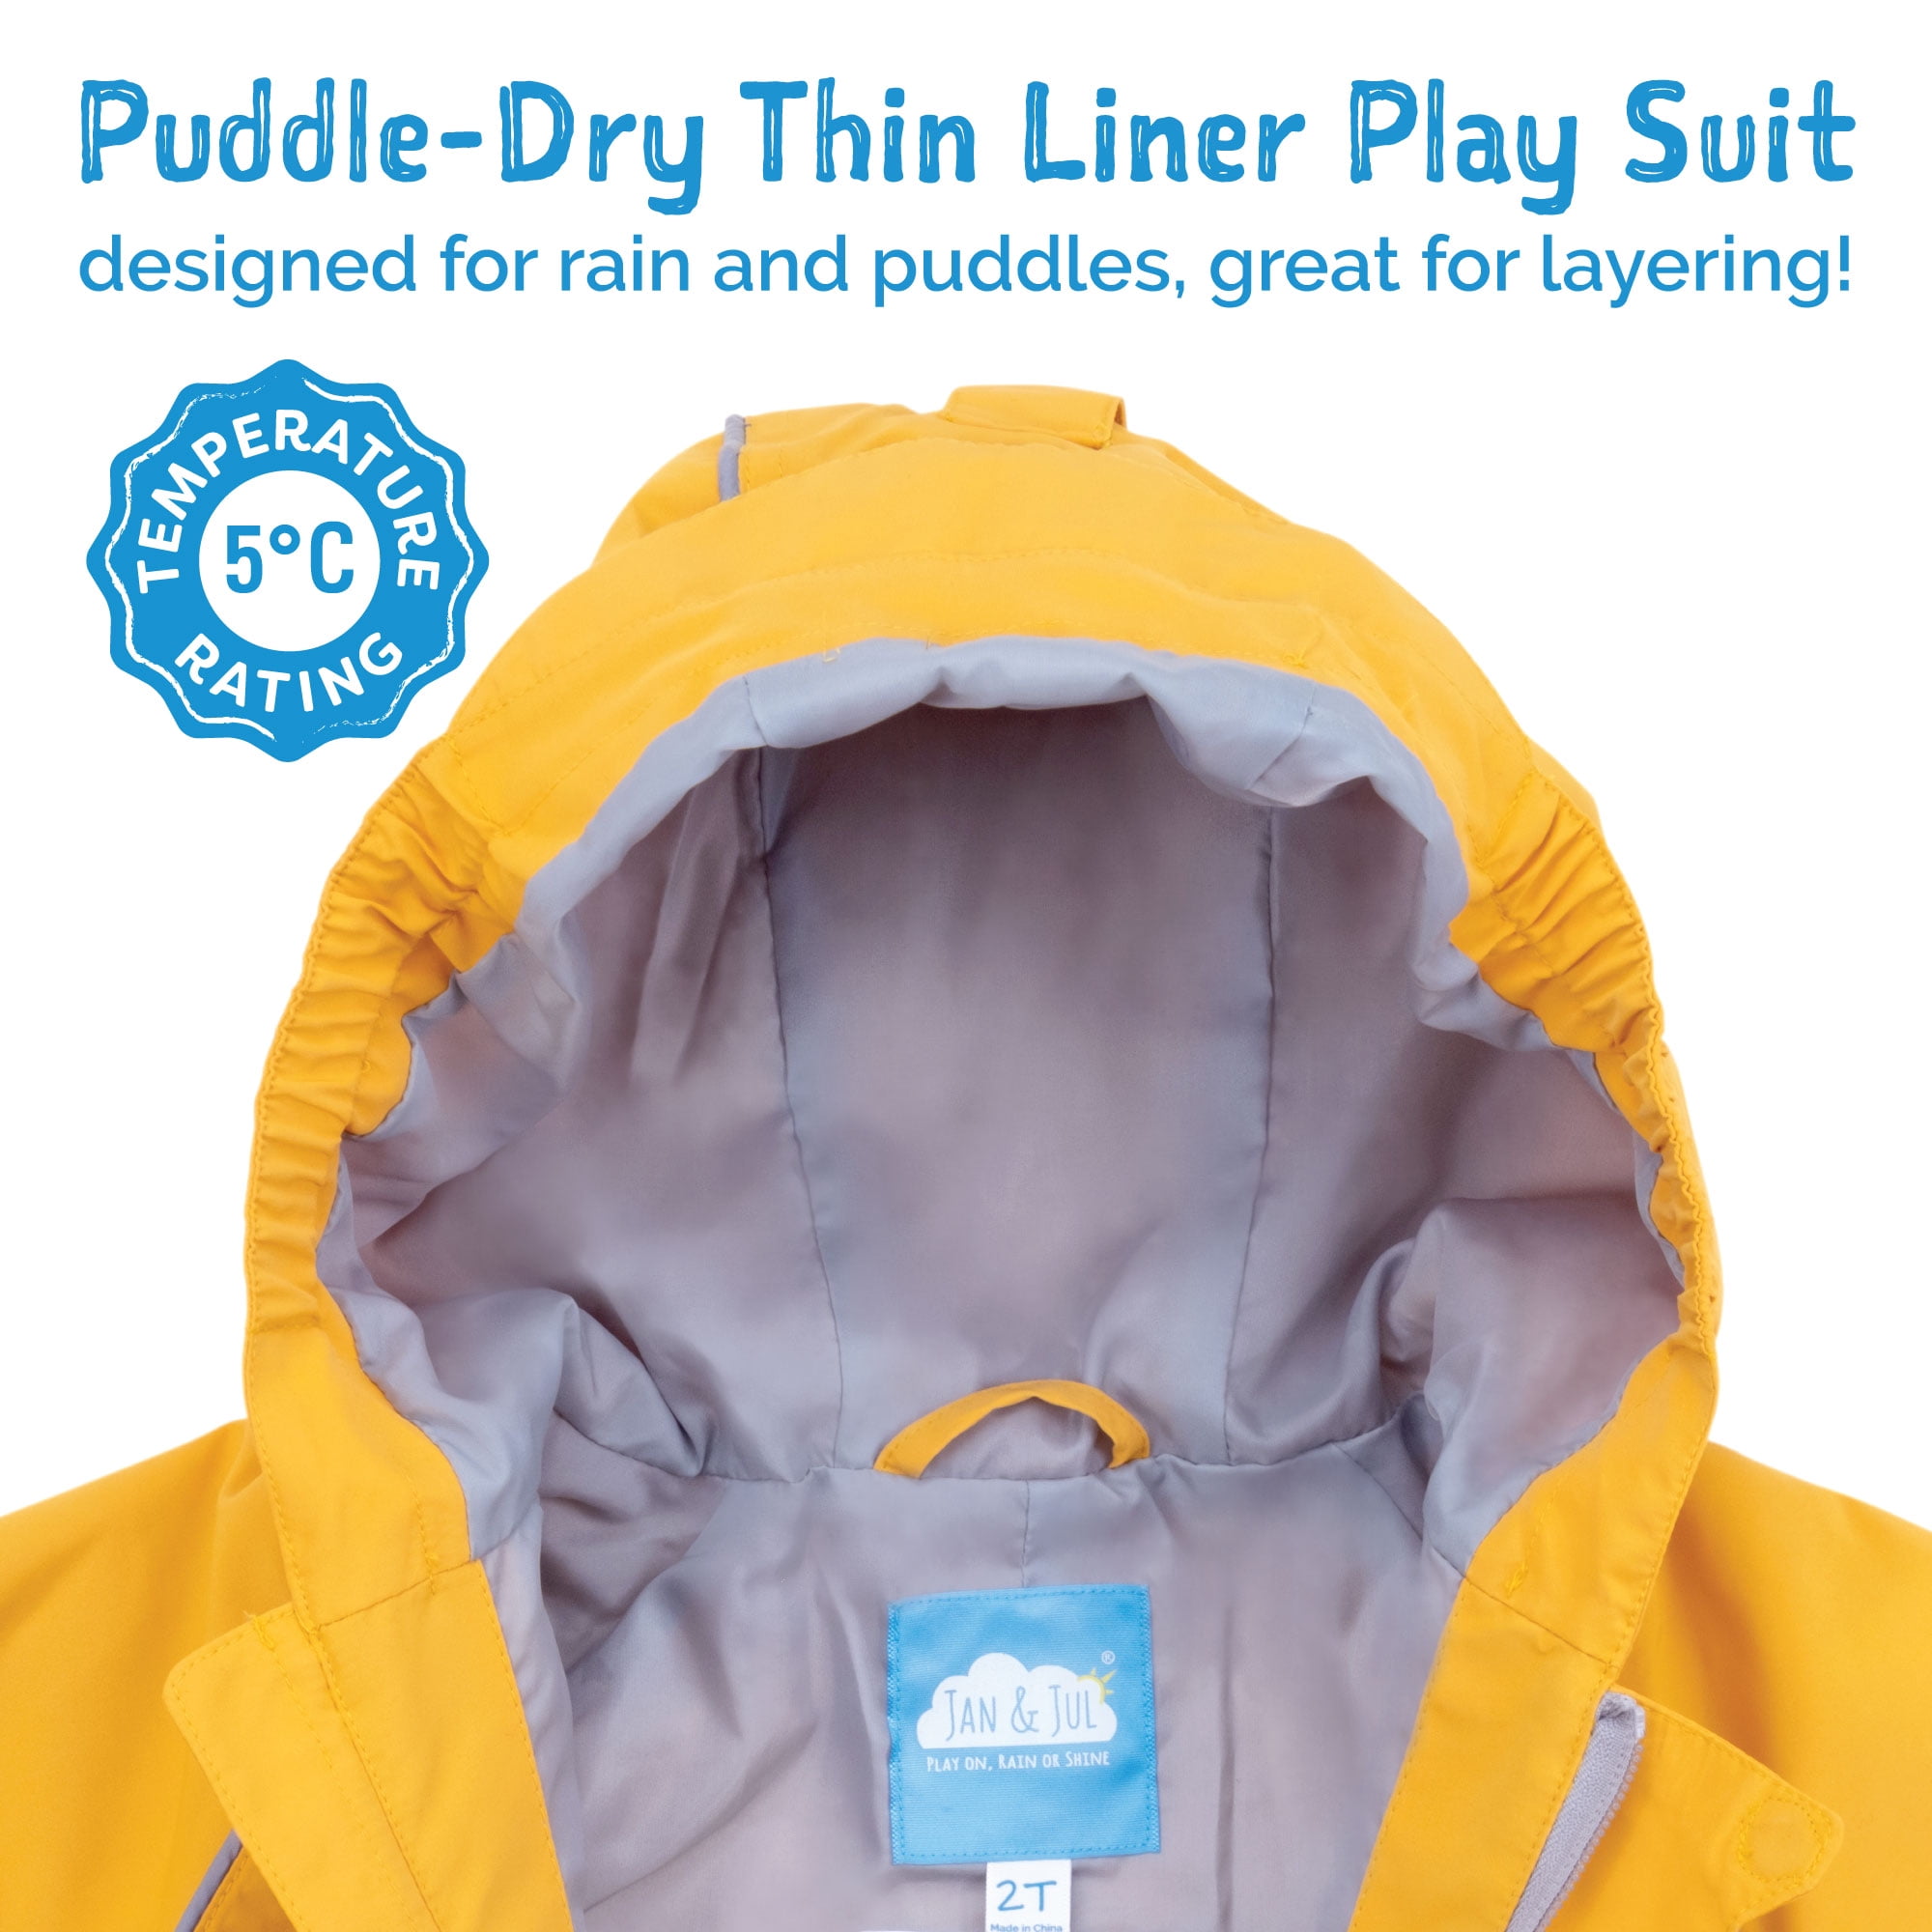 Jan & Jul Water-proof Rain-Suit for Toddler Kids One-Piece Coverall (Puddle-Dry:  Yellow, 4T) 